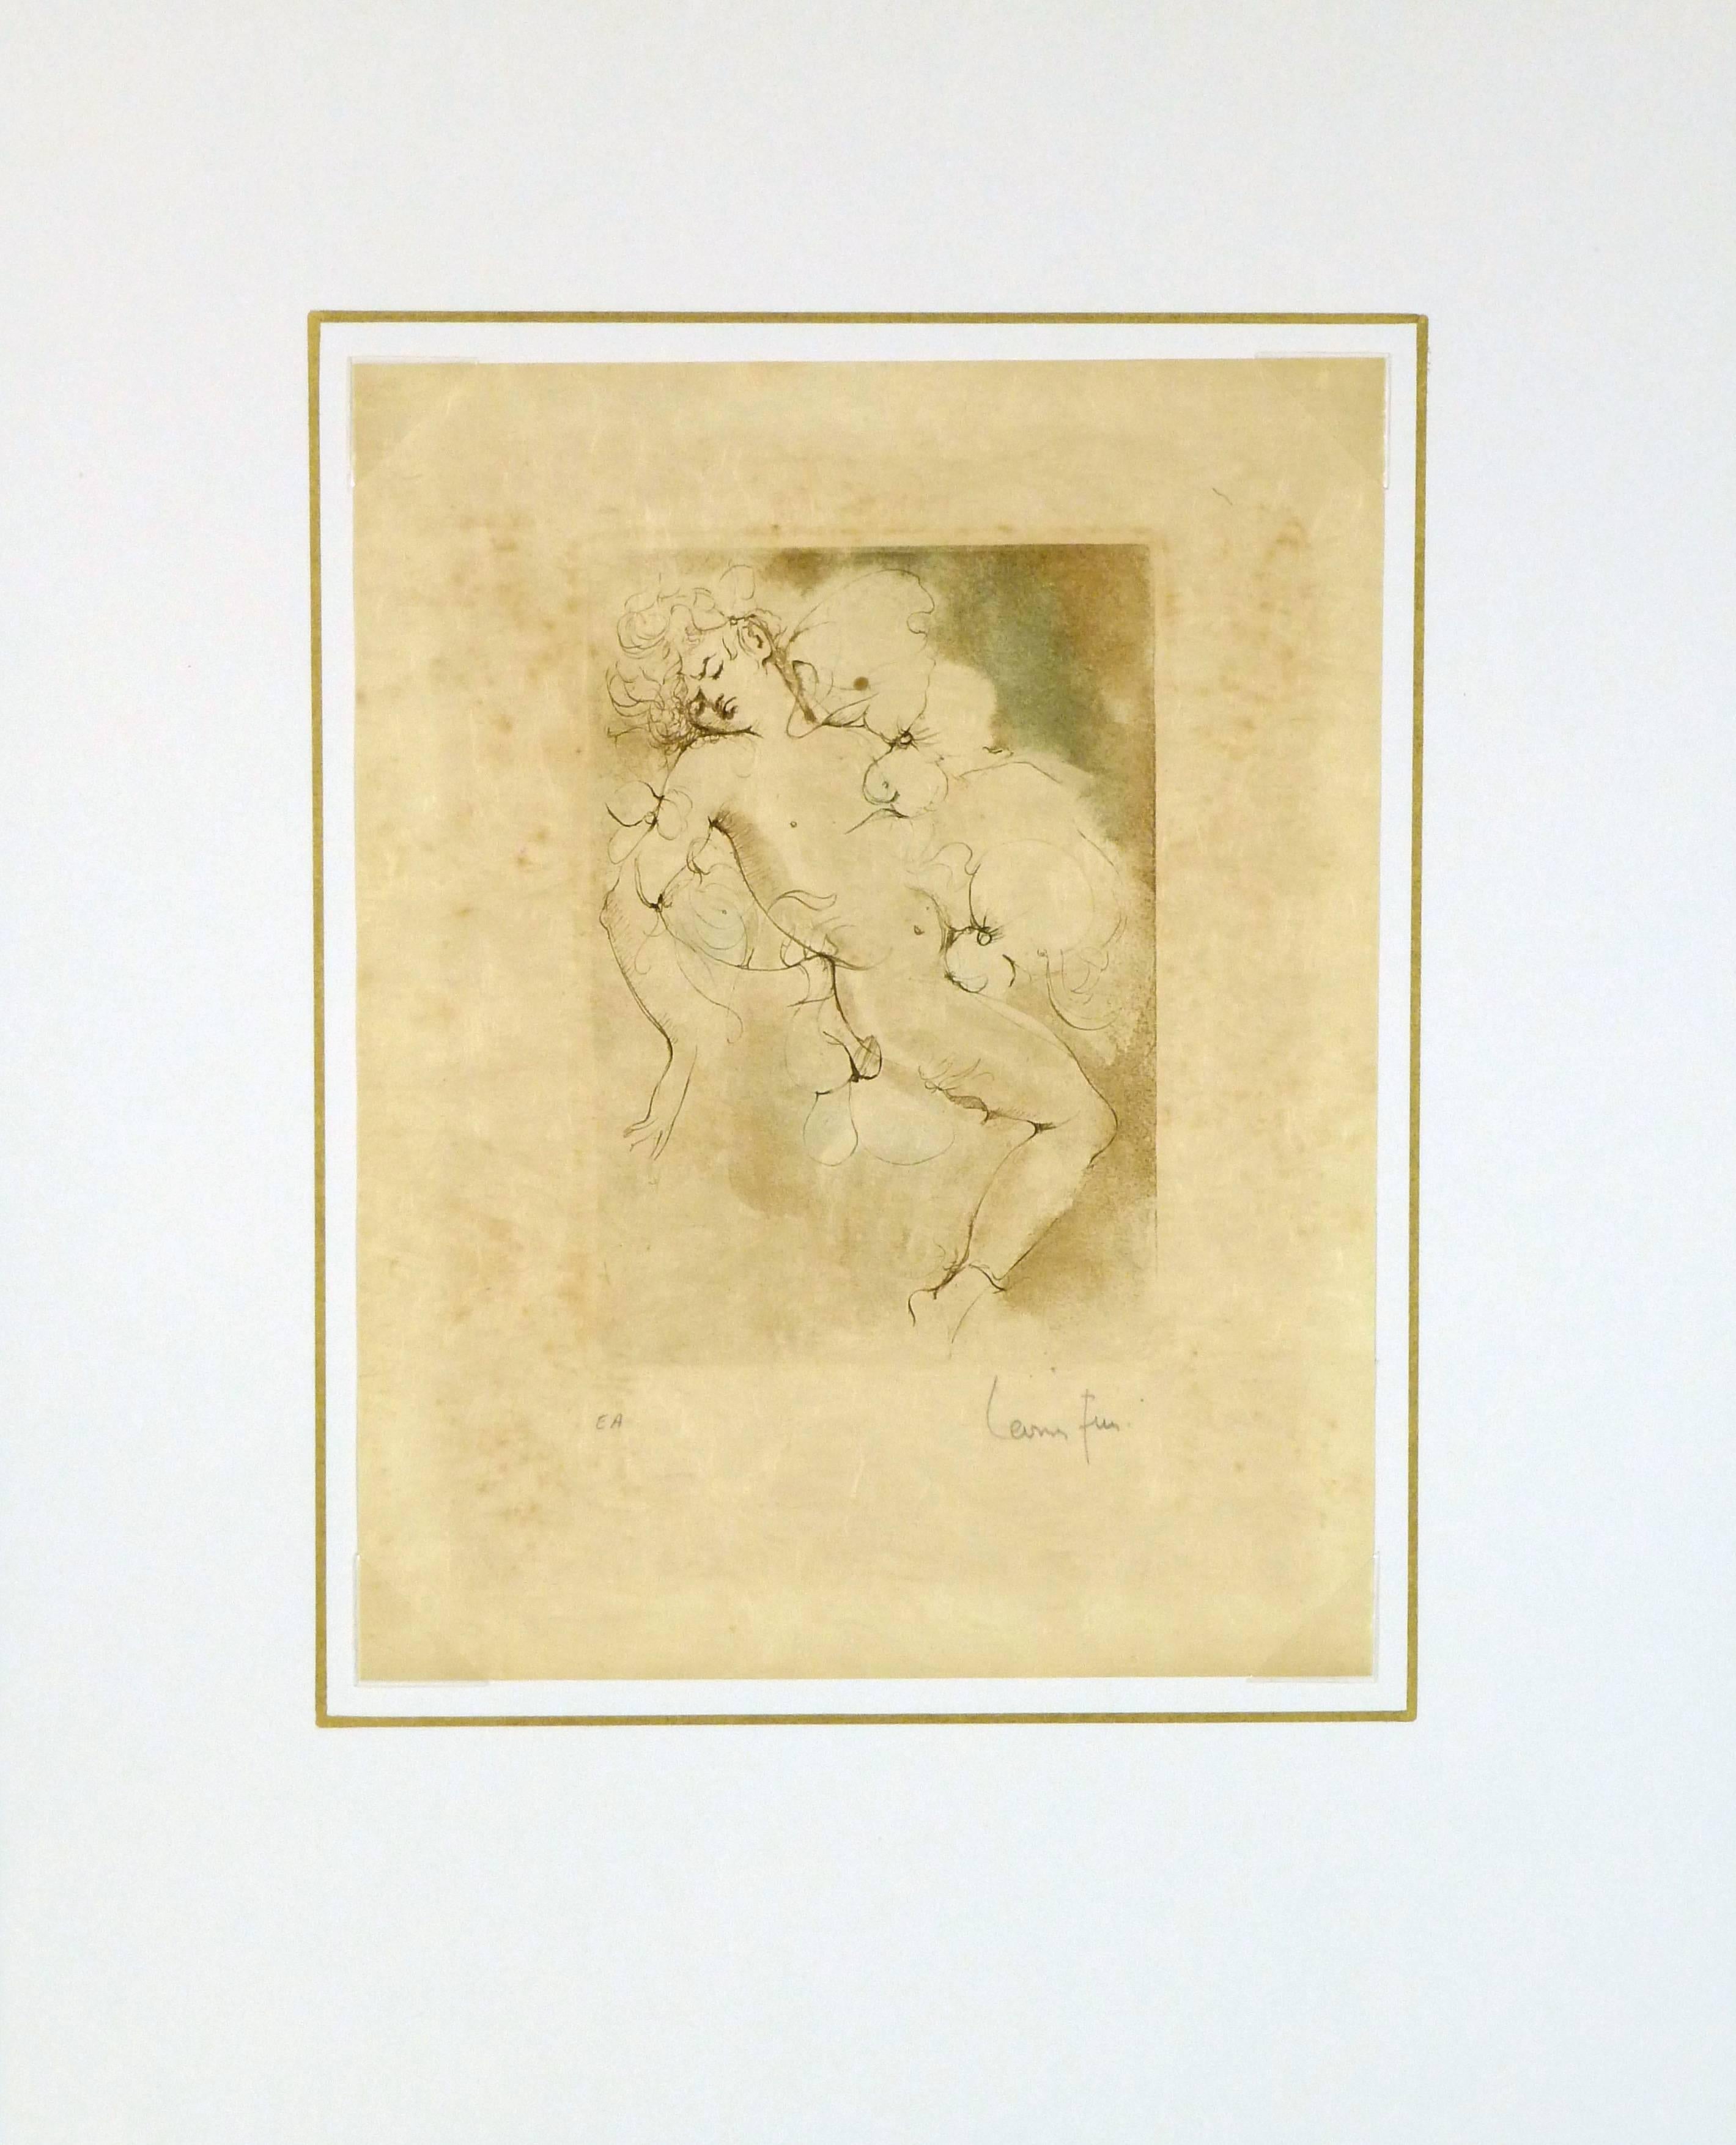 Etching of a female nude figure by artist Leonor Fini (1908-1996), circa 1960. Signed in pencil lower right. 

Original vintage work of art on paper displayed on a white mat with a gold border and fits a standard-size frame. Archival plastic sleeve